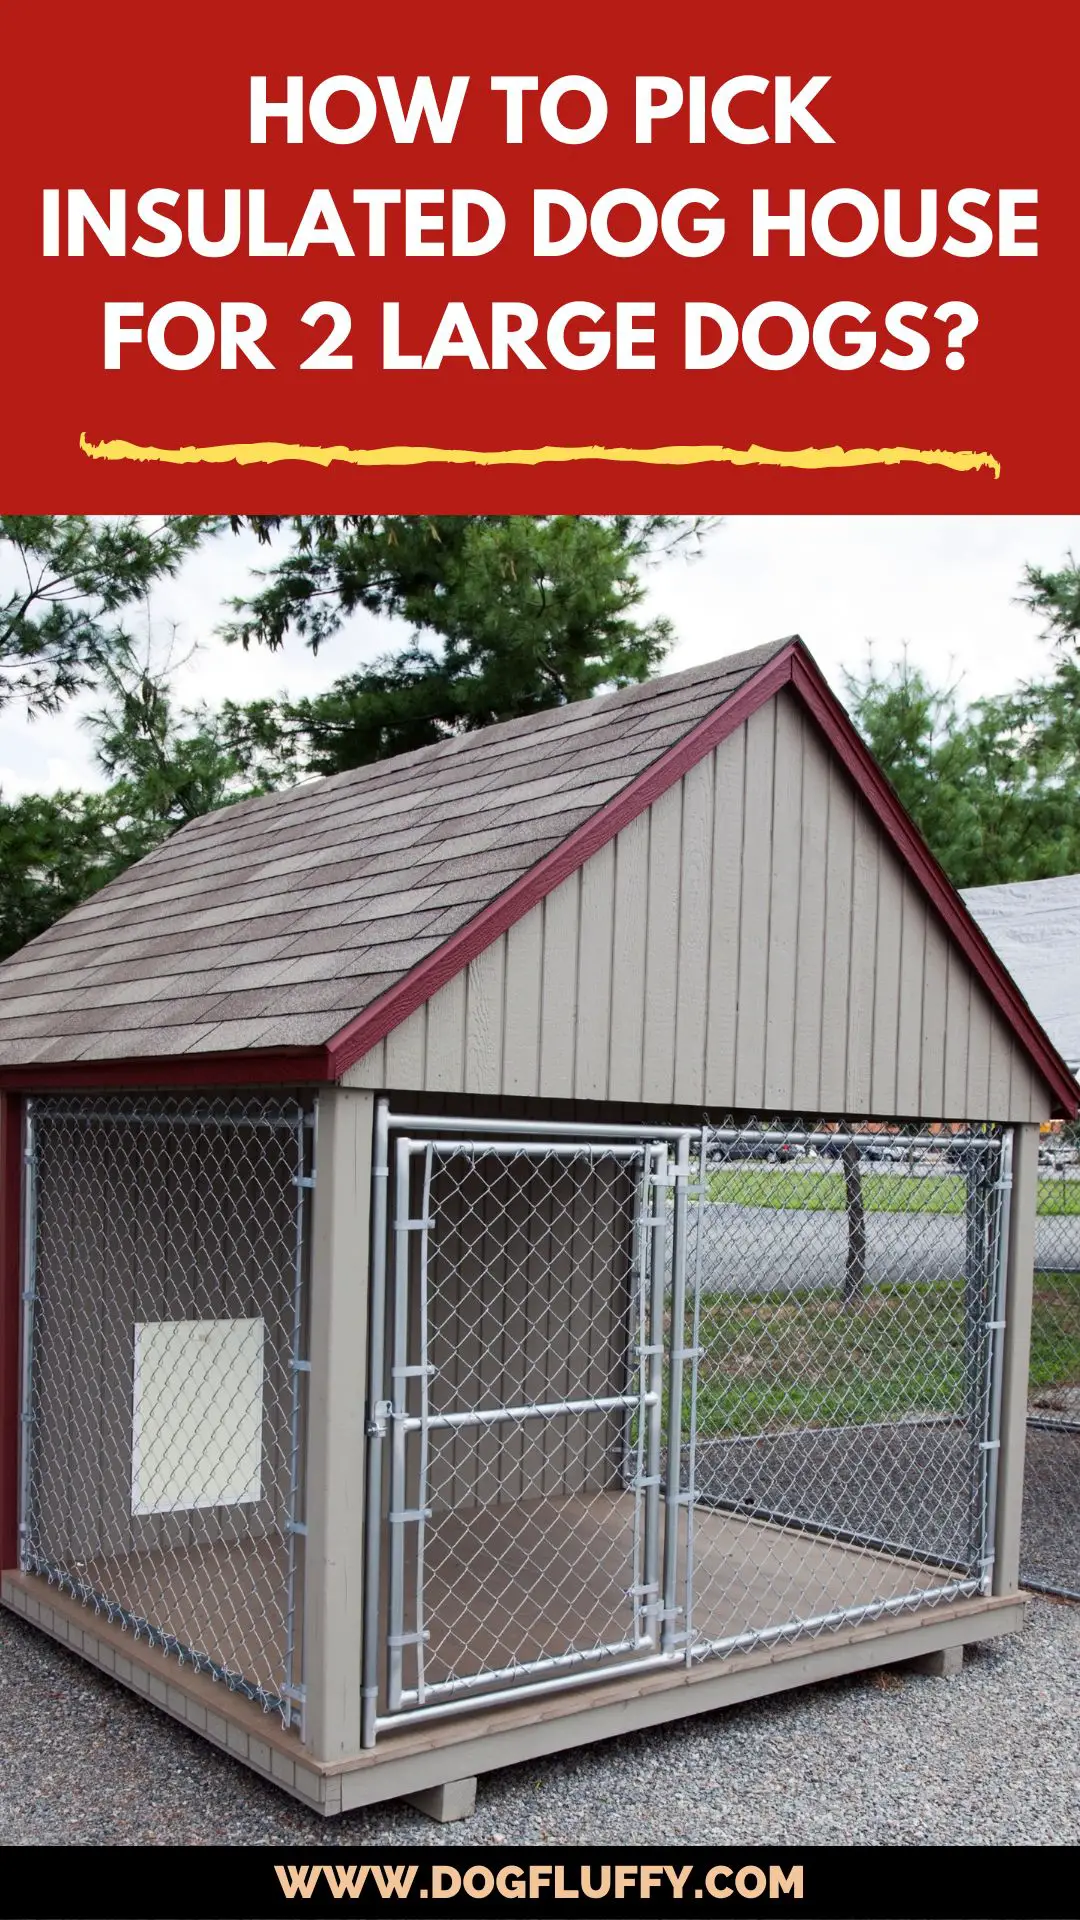 How to Pick Insulated Dog House for 2 Large Dogs? - PIN 1080 * 1920